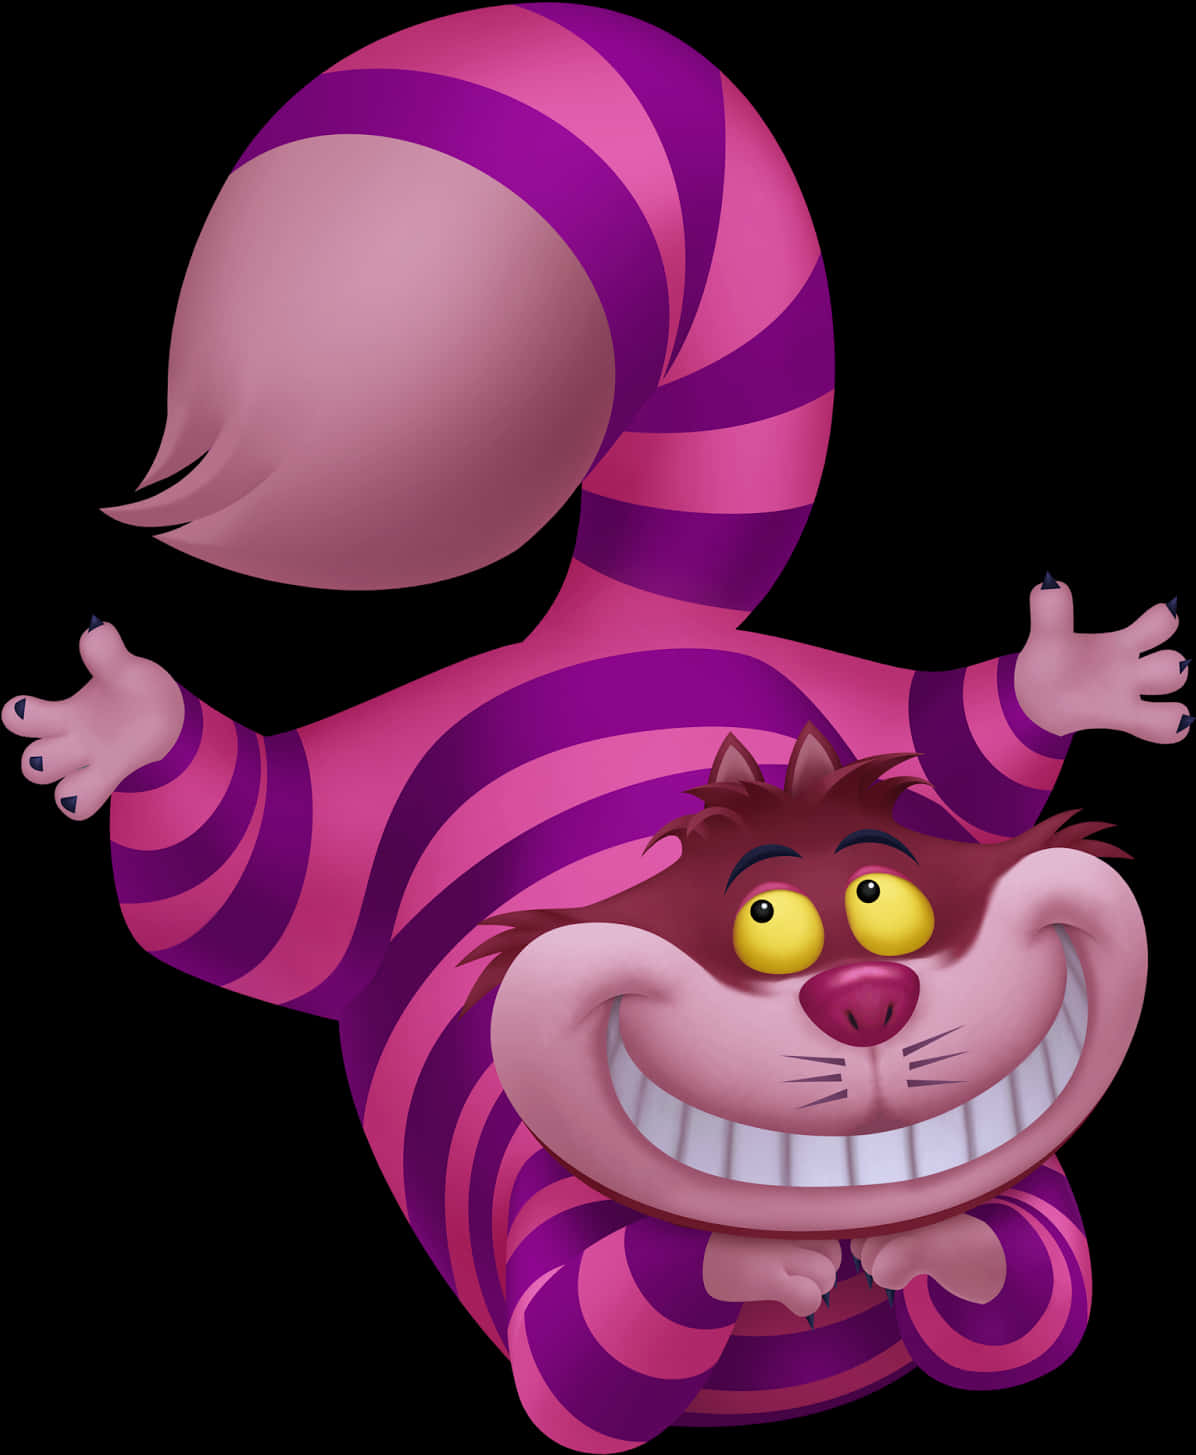 Cheshire Cat Grinning Disney Character PNG image